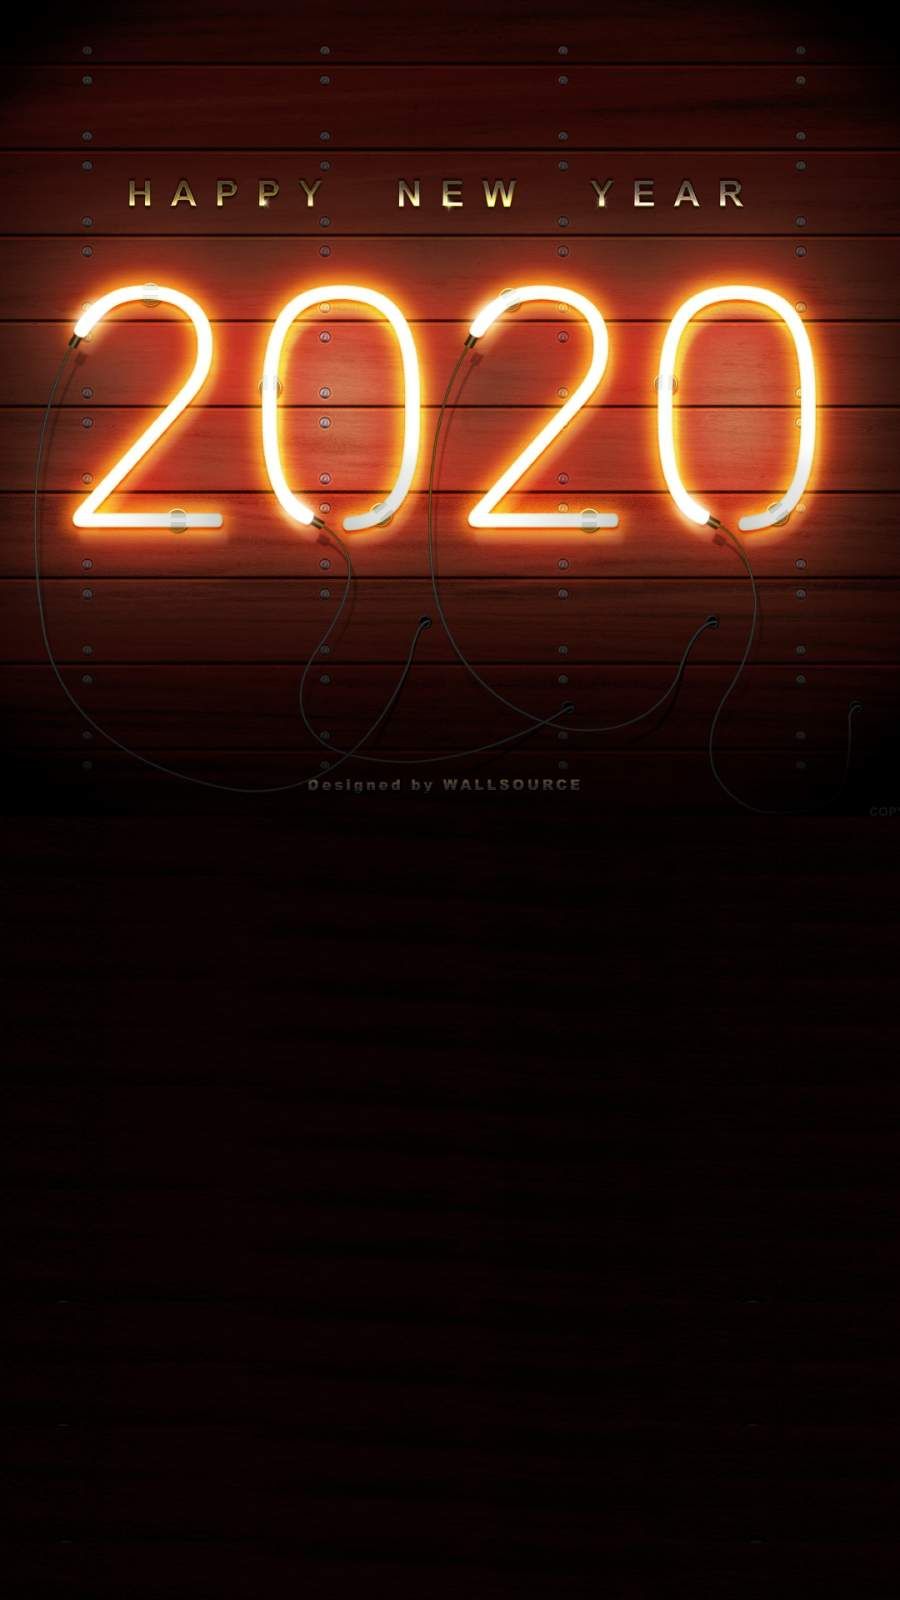 Happy New Year 2020 iPhone Wallpaper in 2020 Happy new year 900x1600